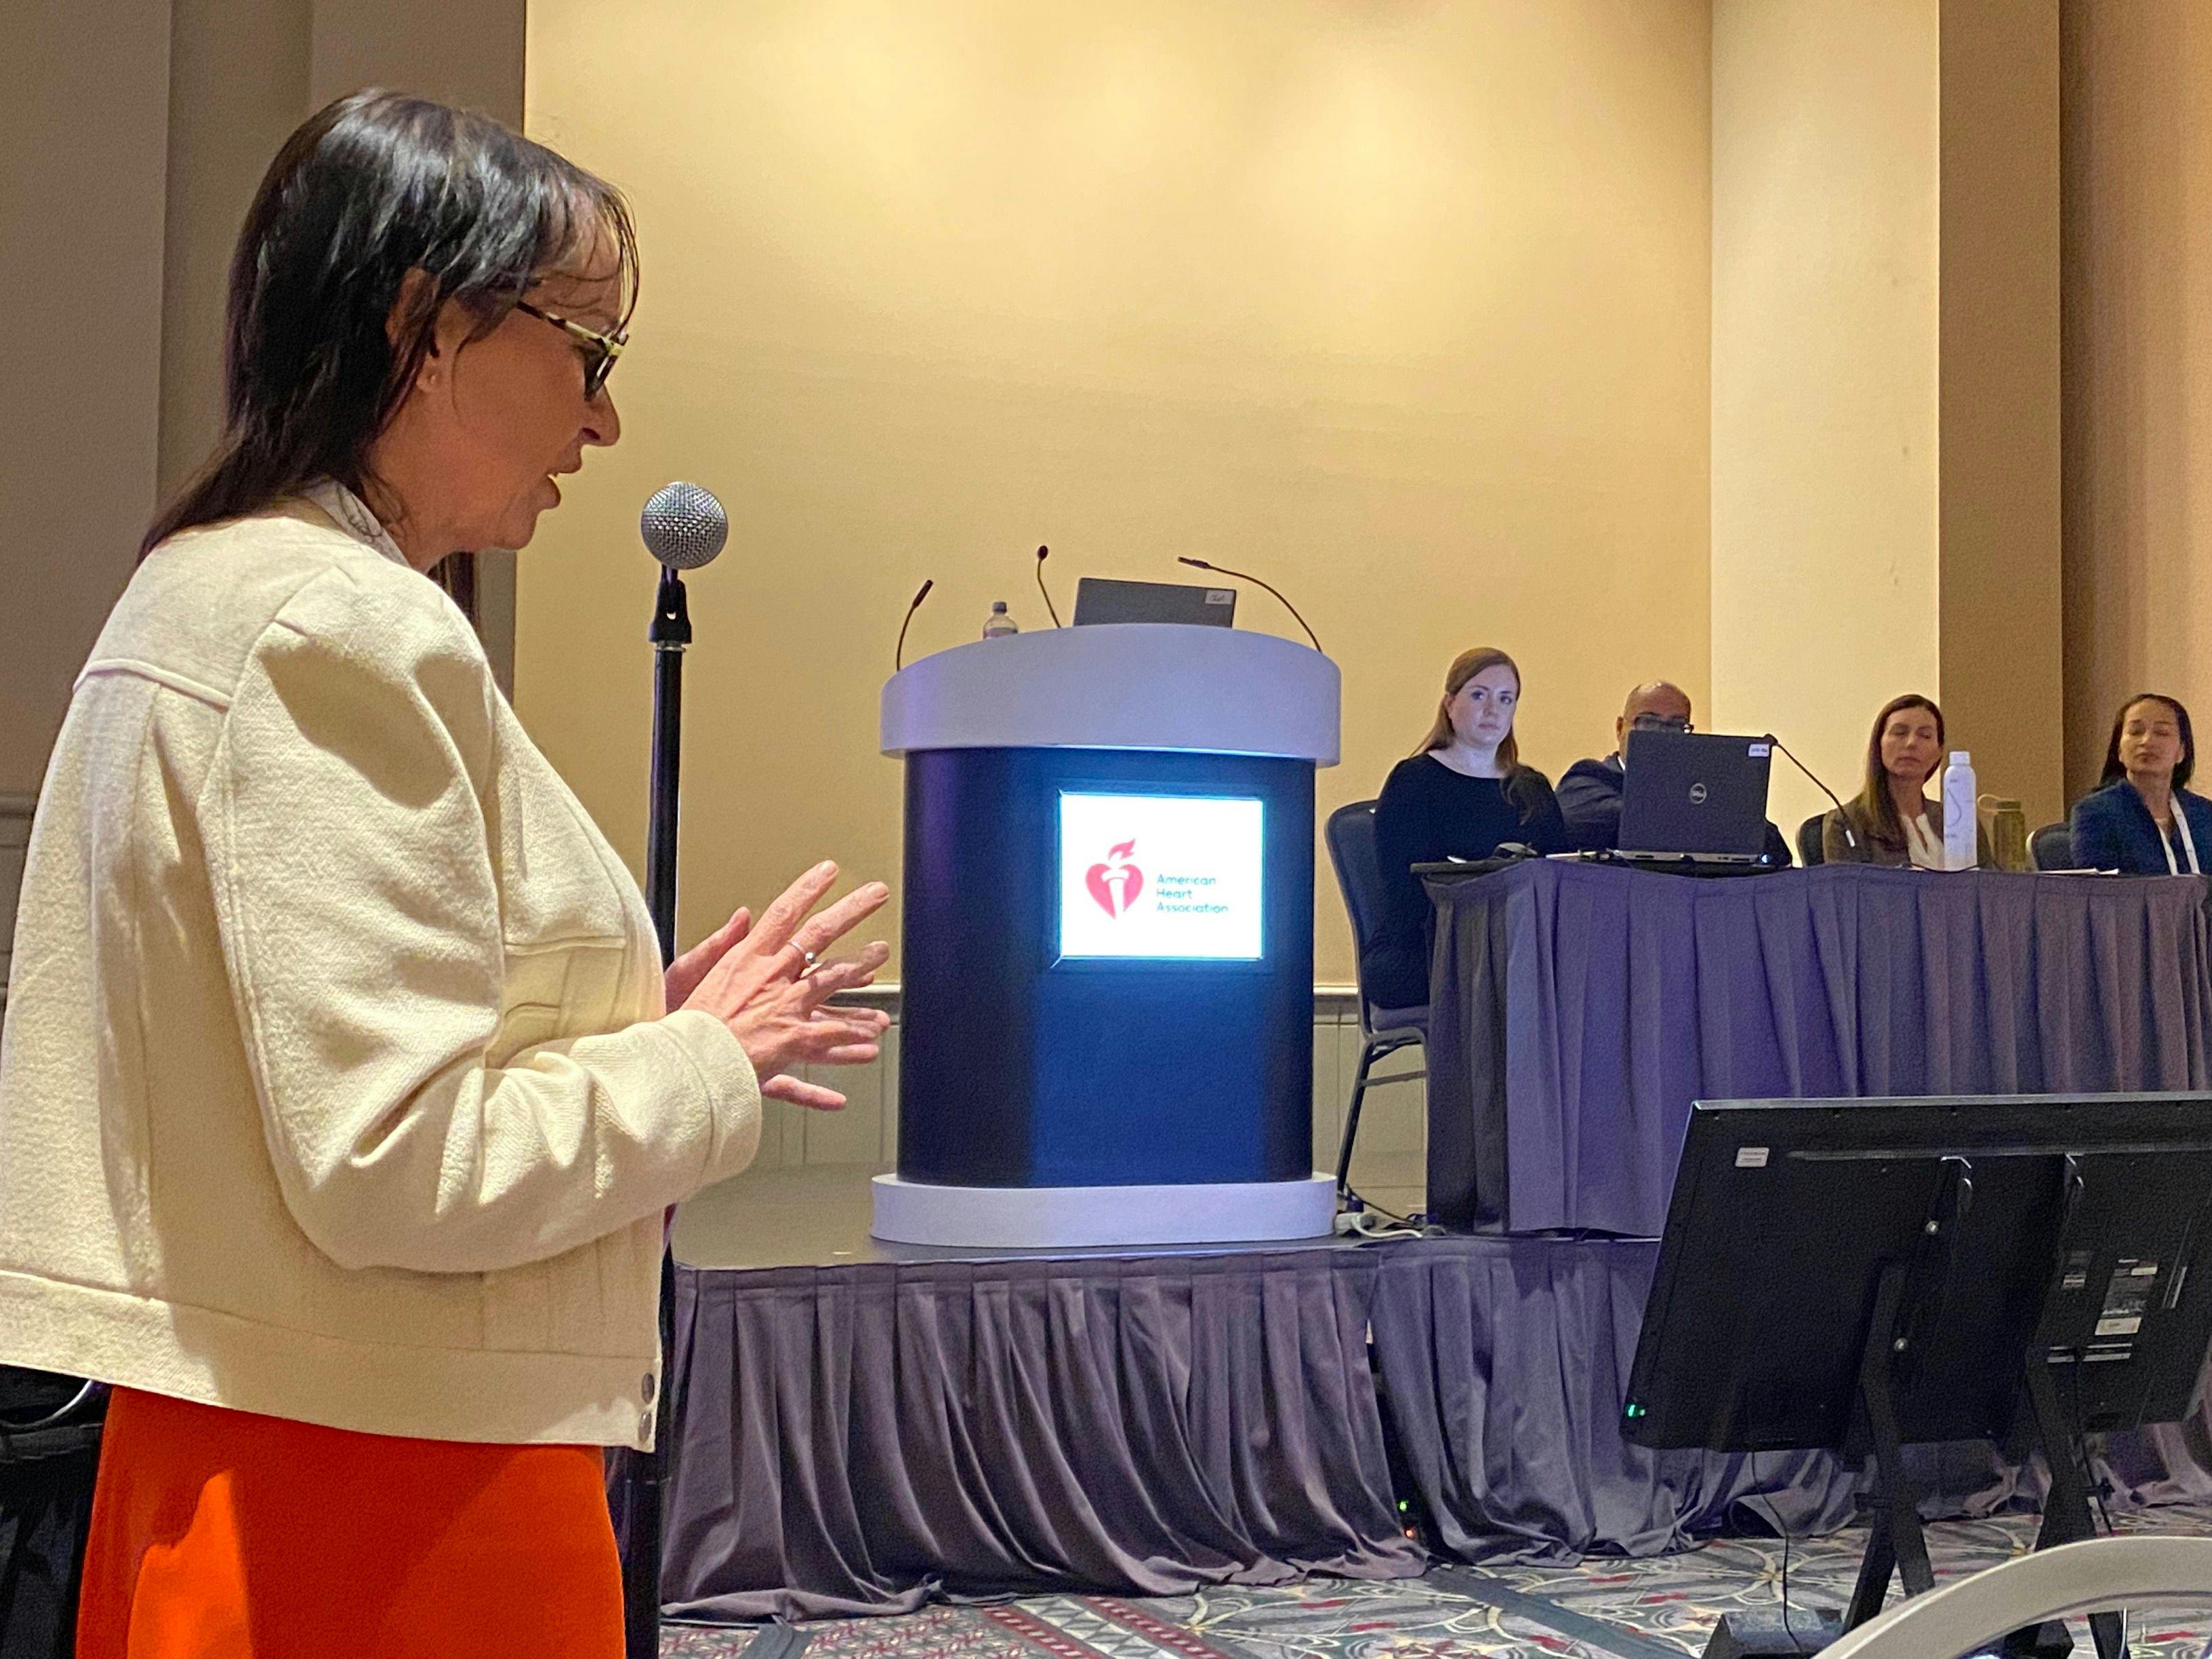 Shelly Zieroth, a heart failure cardiologist at St. Boniface Hospital in Winnipeg, Manitoba, talked about the need to get more women leading and participating in clinical trials at the American Heart Association Scientific Sessions in Philadelphia. (Photo: Ron Southwick)